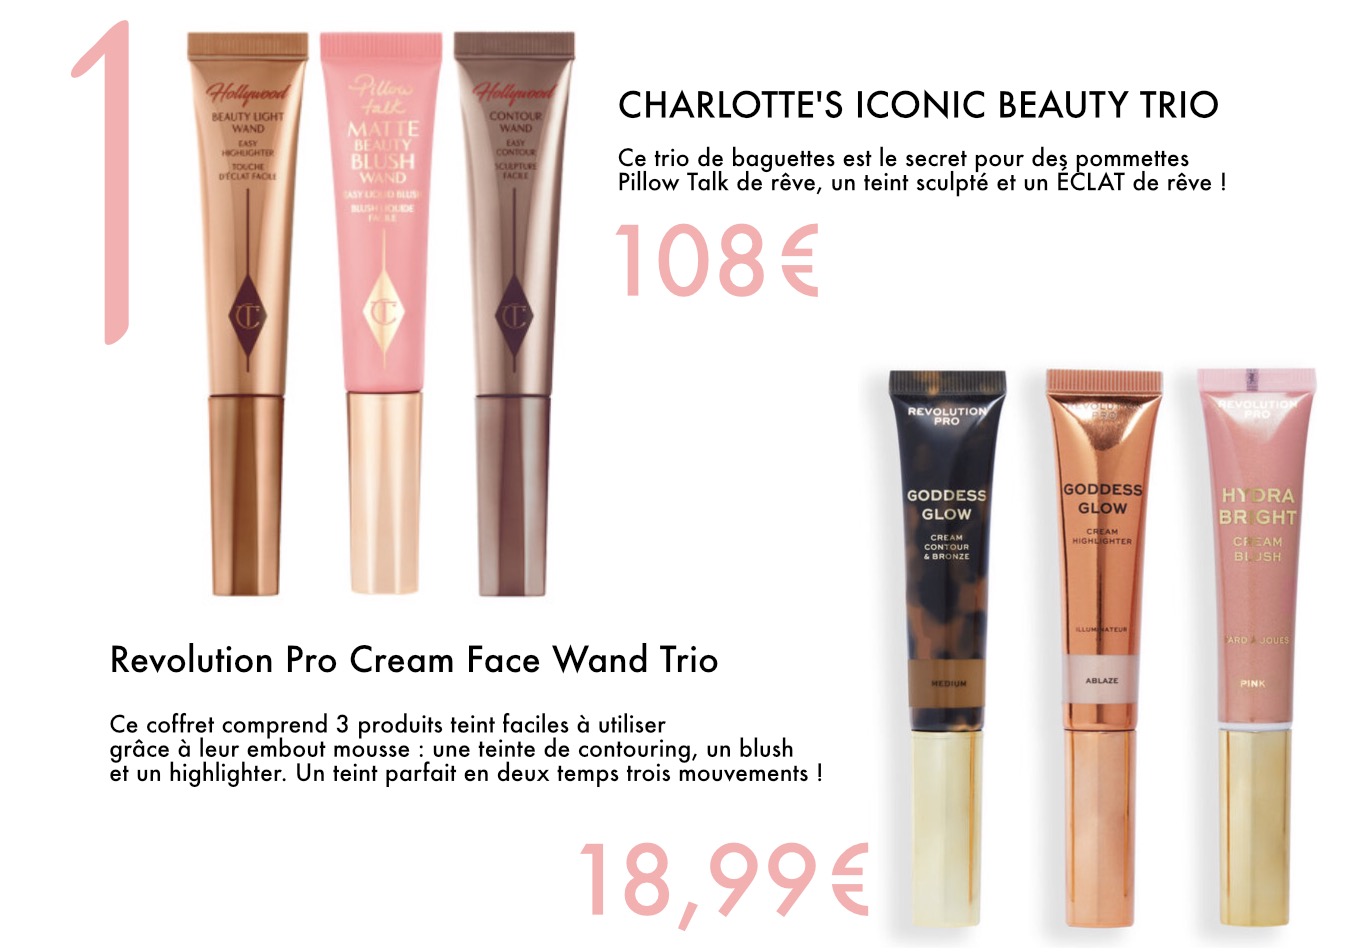 Dupe Charlottes Iconic Beauty Trio